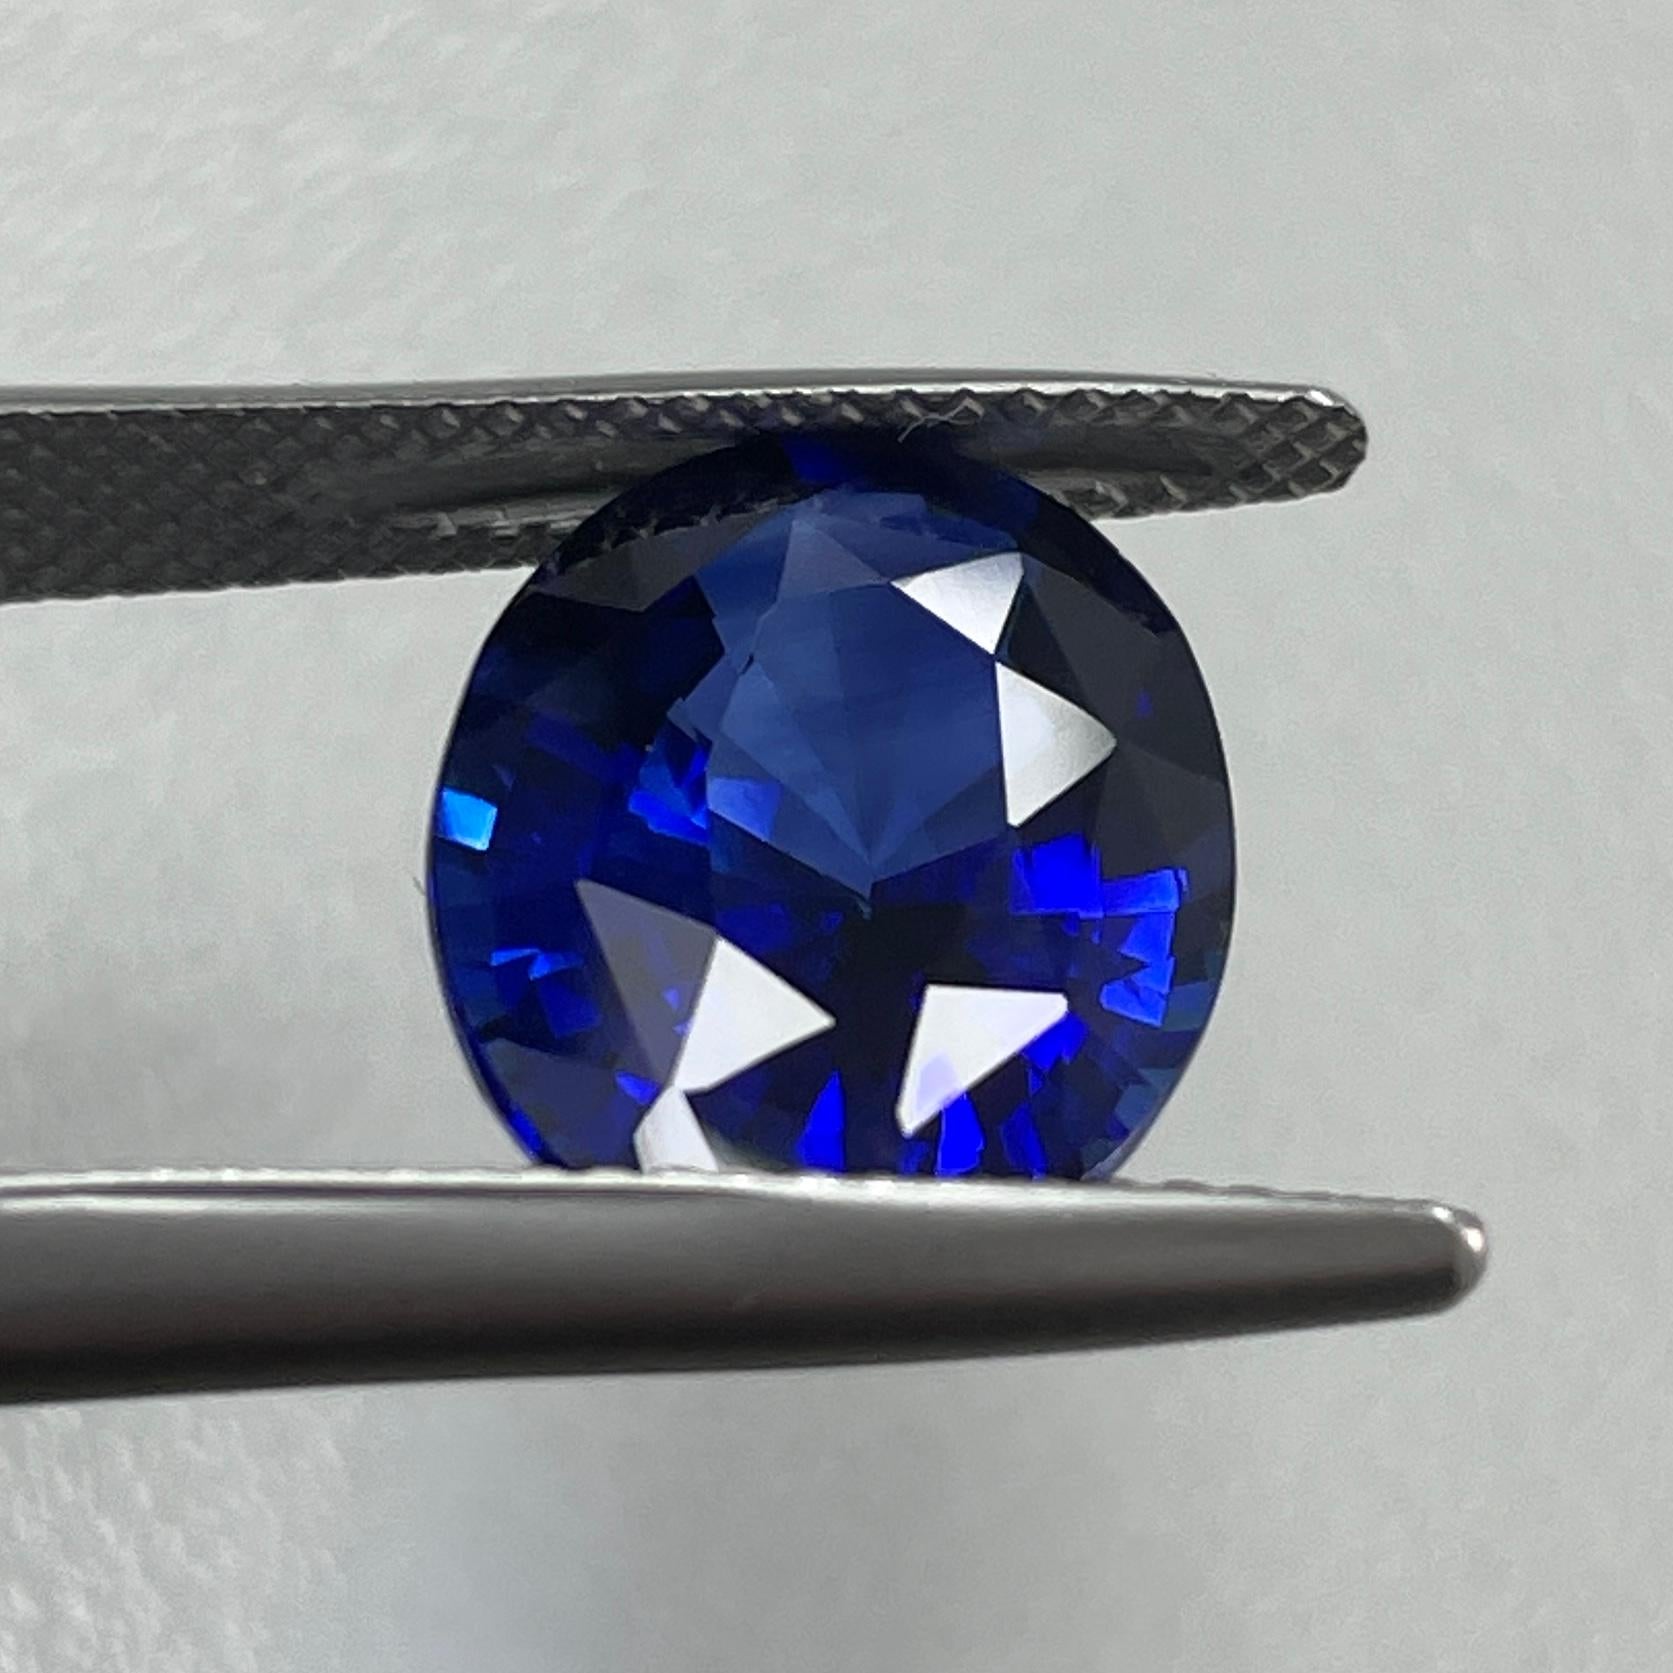 8.09Ct blue sapphire with fair clarity (fully eye clean). Also has excellent cutting and good polish to show amazing glimmer, would look lovely in jewelry!
We can help you make your dream jewelry piece with this. 